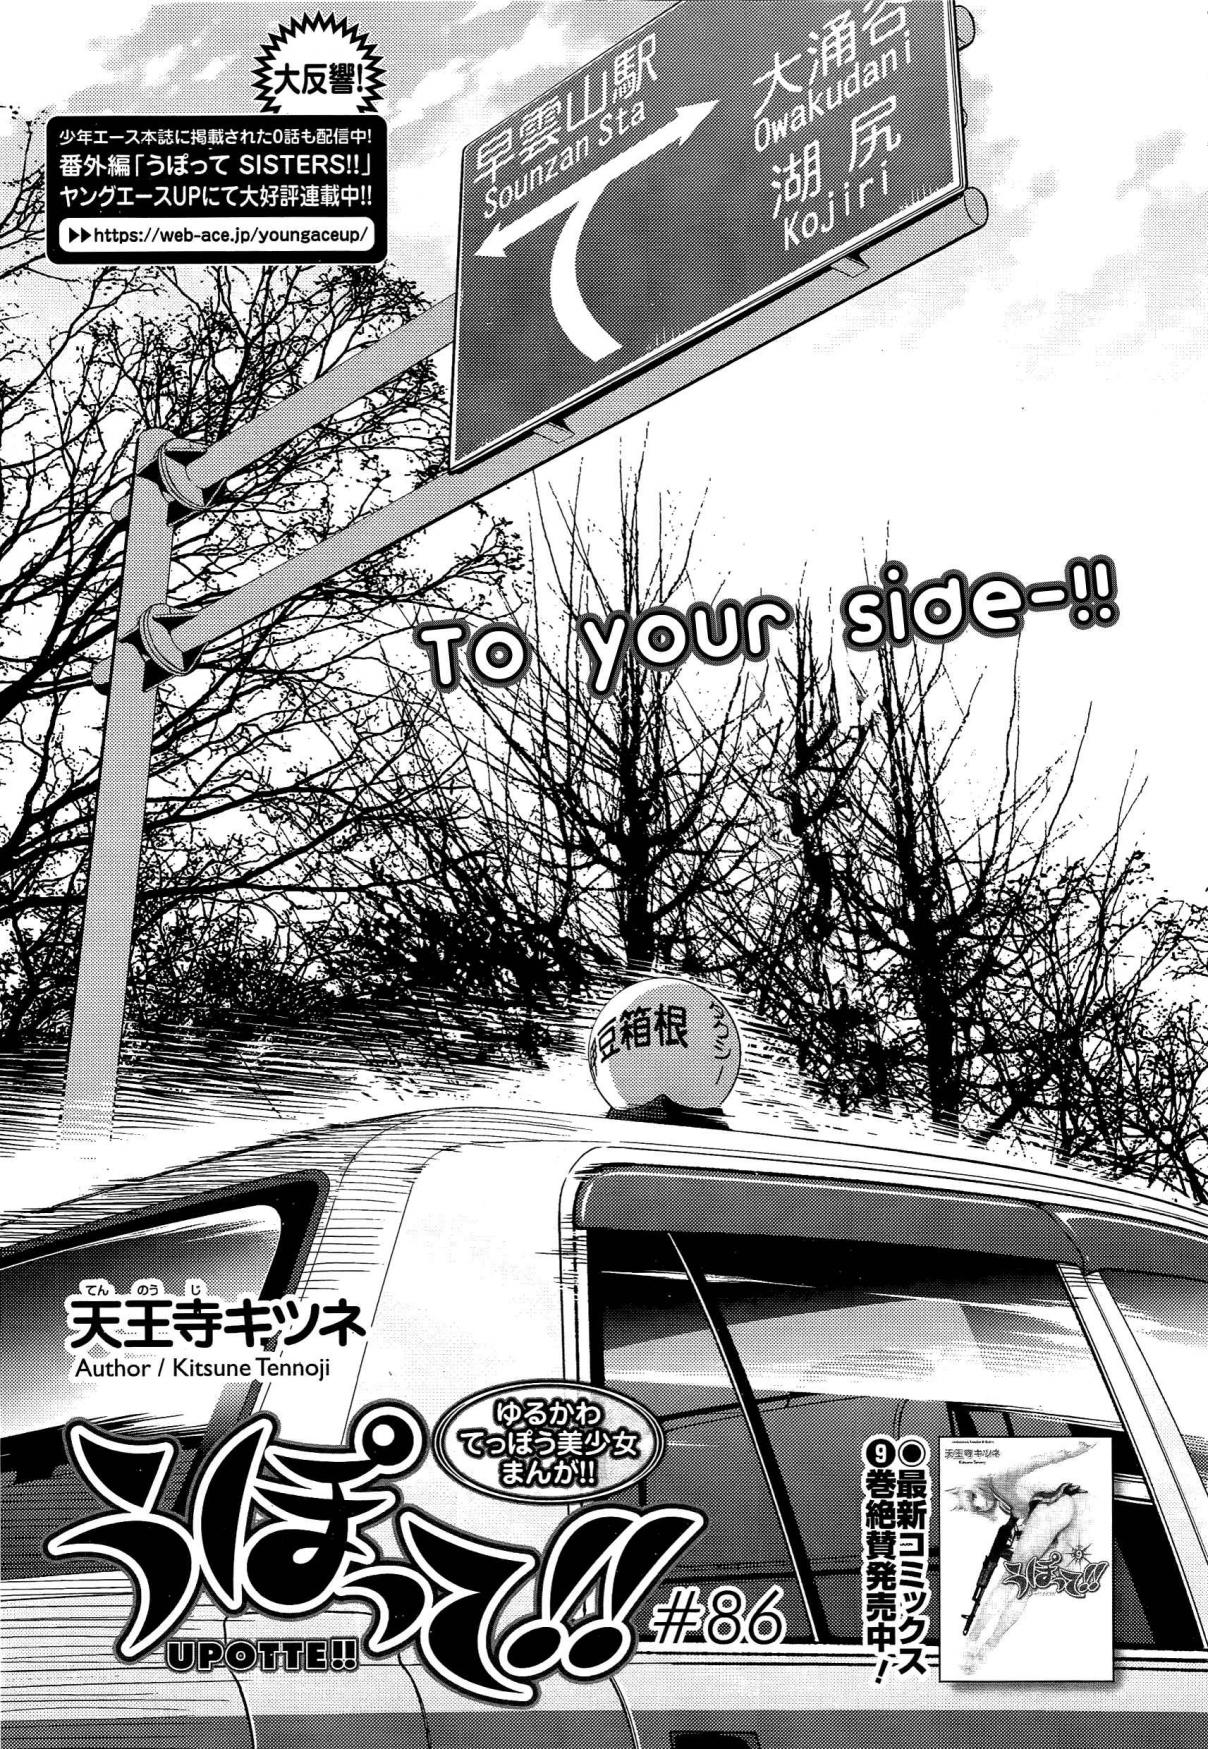 Upotte!! Ch. 88 To your side !!